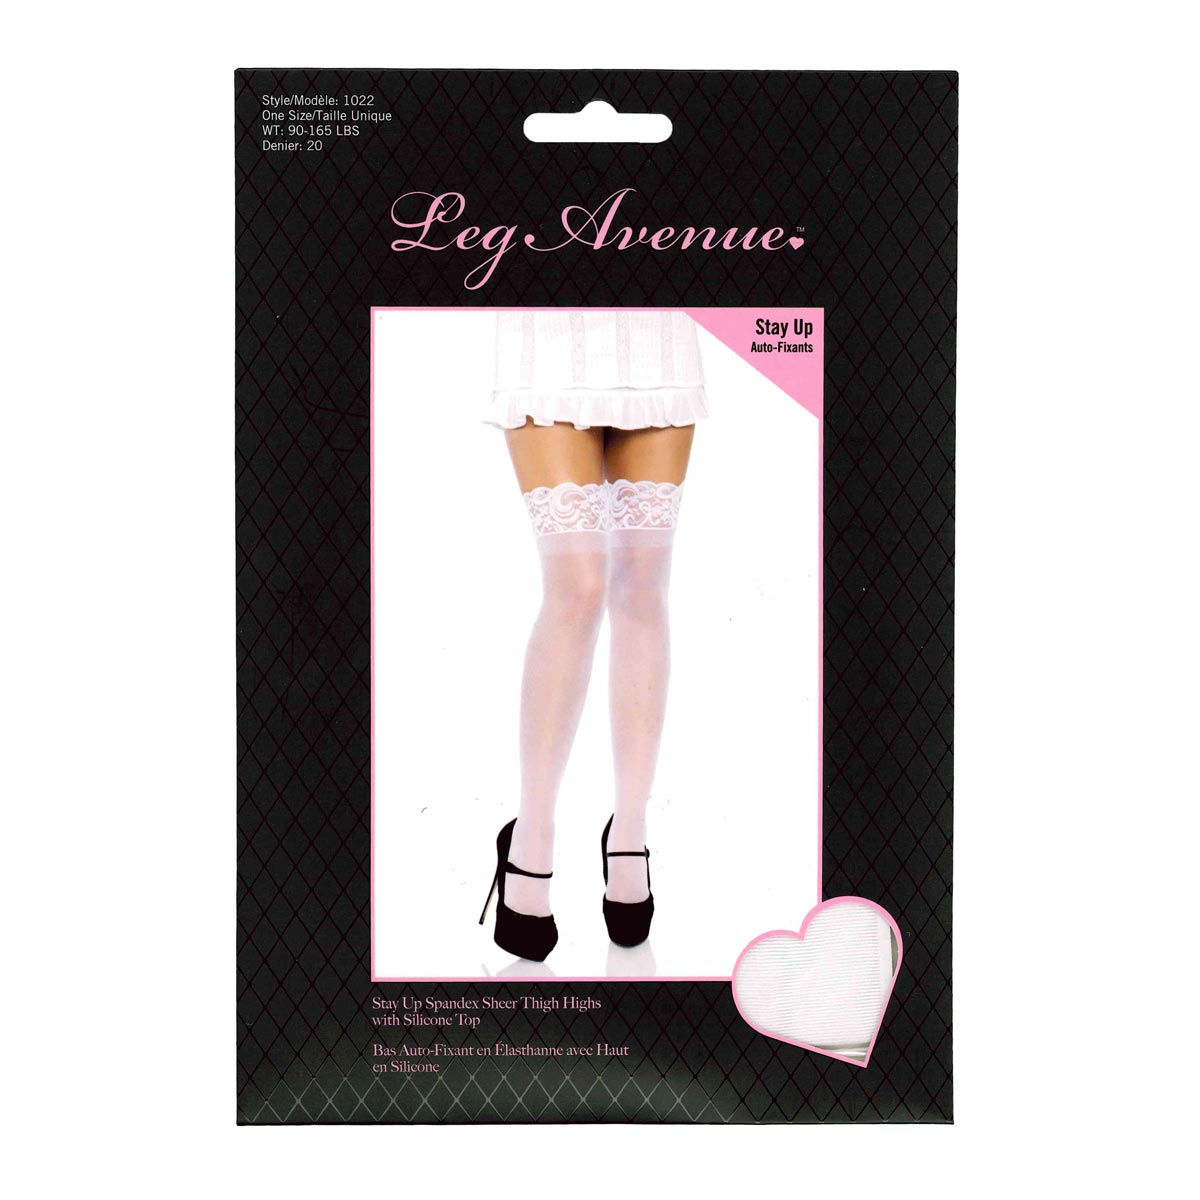 Leg Avenue™ Silicone Stay Up Lace Top Spandex Sheer Thigh Highs – White – O/S